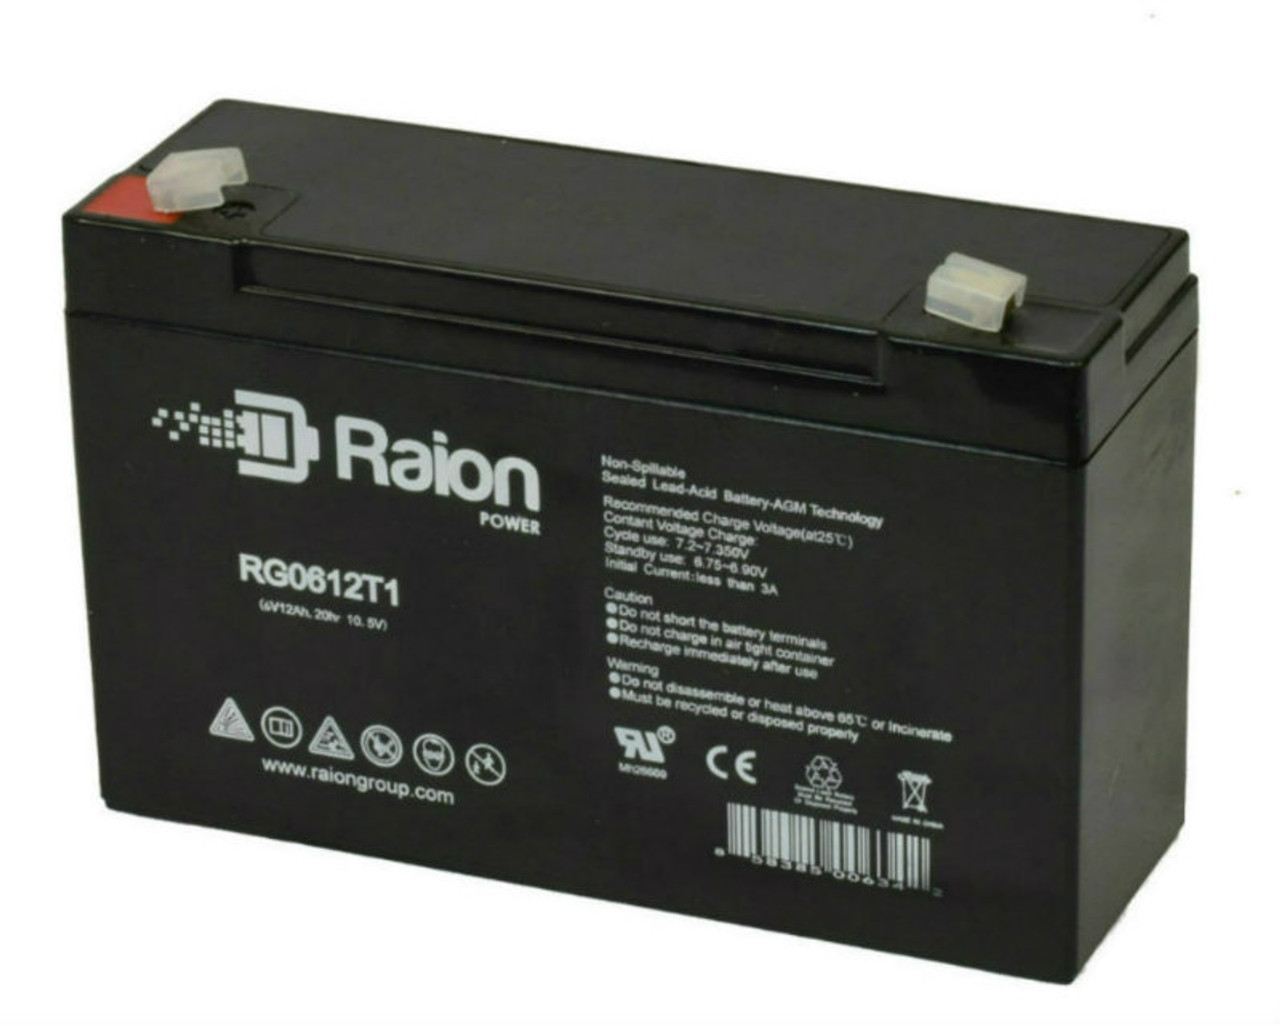 Raion Power RG06120T1 Replacement Battery for MHB MS12-6B